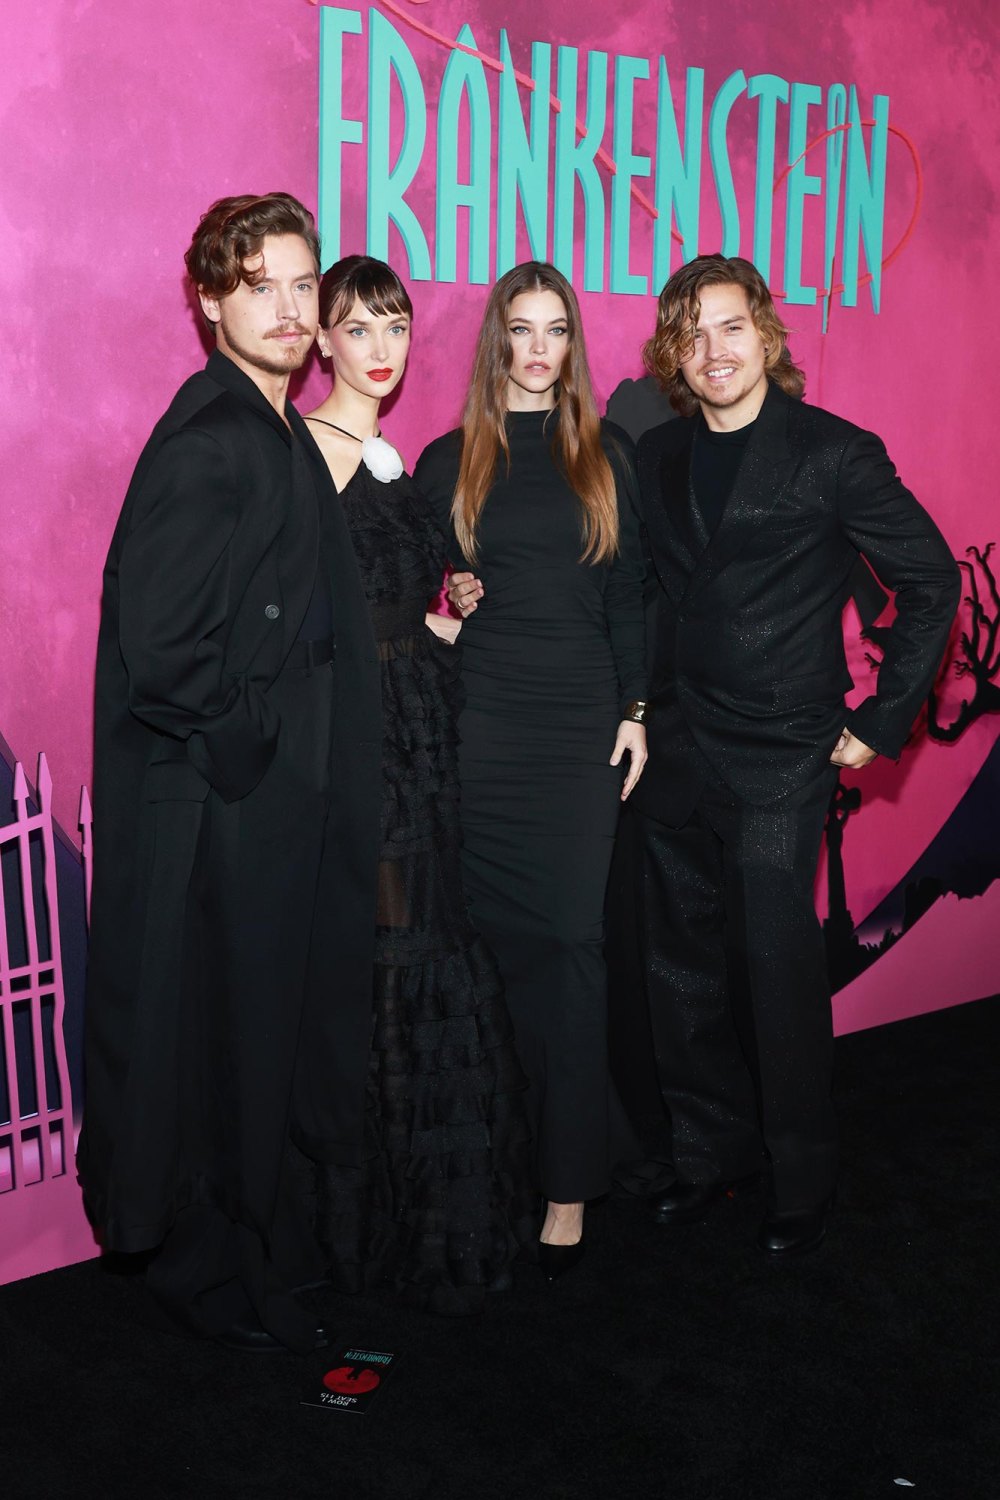 Dylan Sprouse and Barbara Palvin Coordinate in Black on Date Night at Lisa Frankenstein Screening